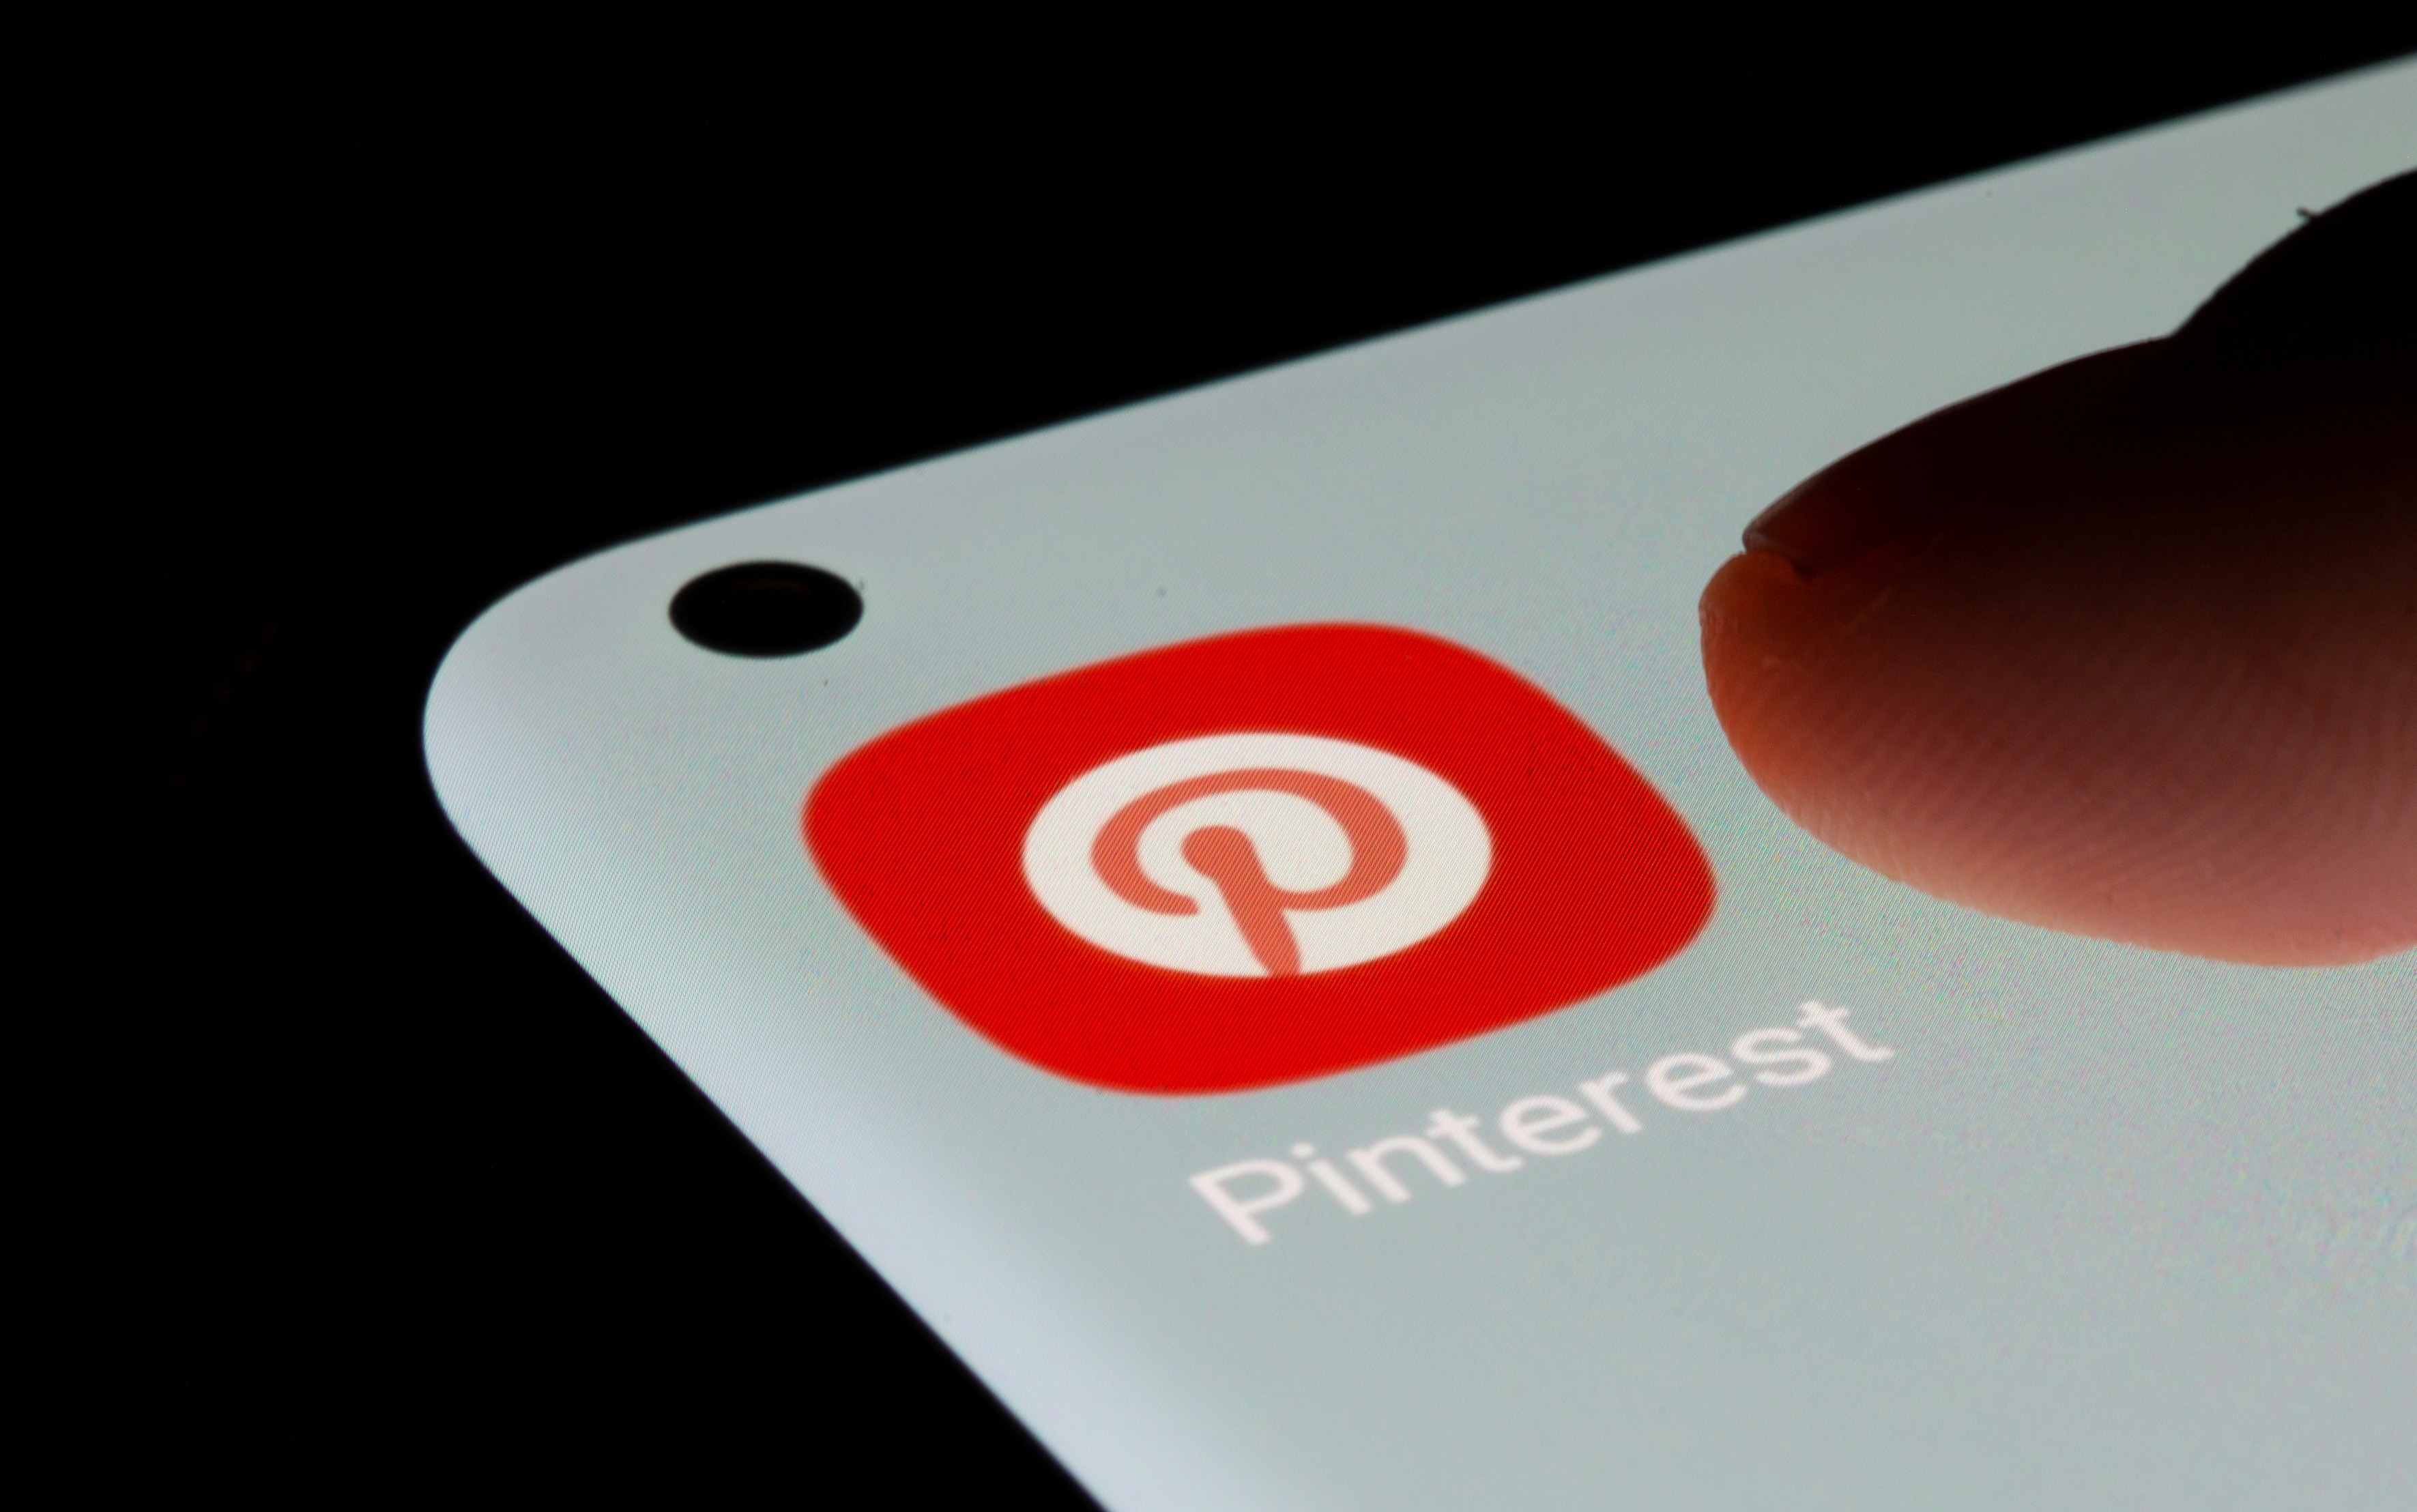 PayPal in $45 bln bid for Pinterest -sources | Reuters